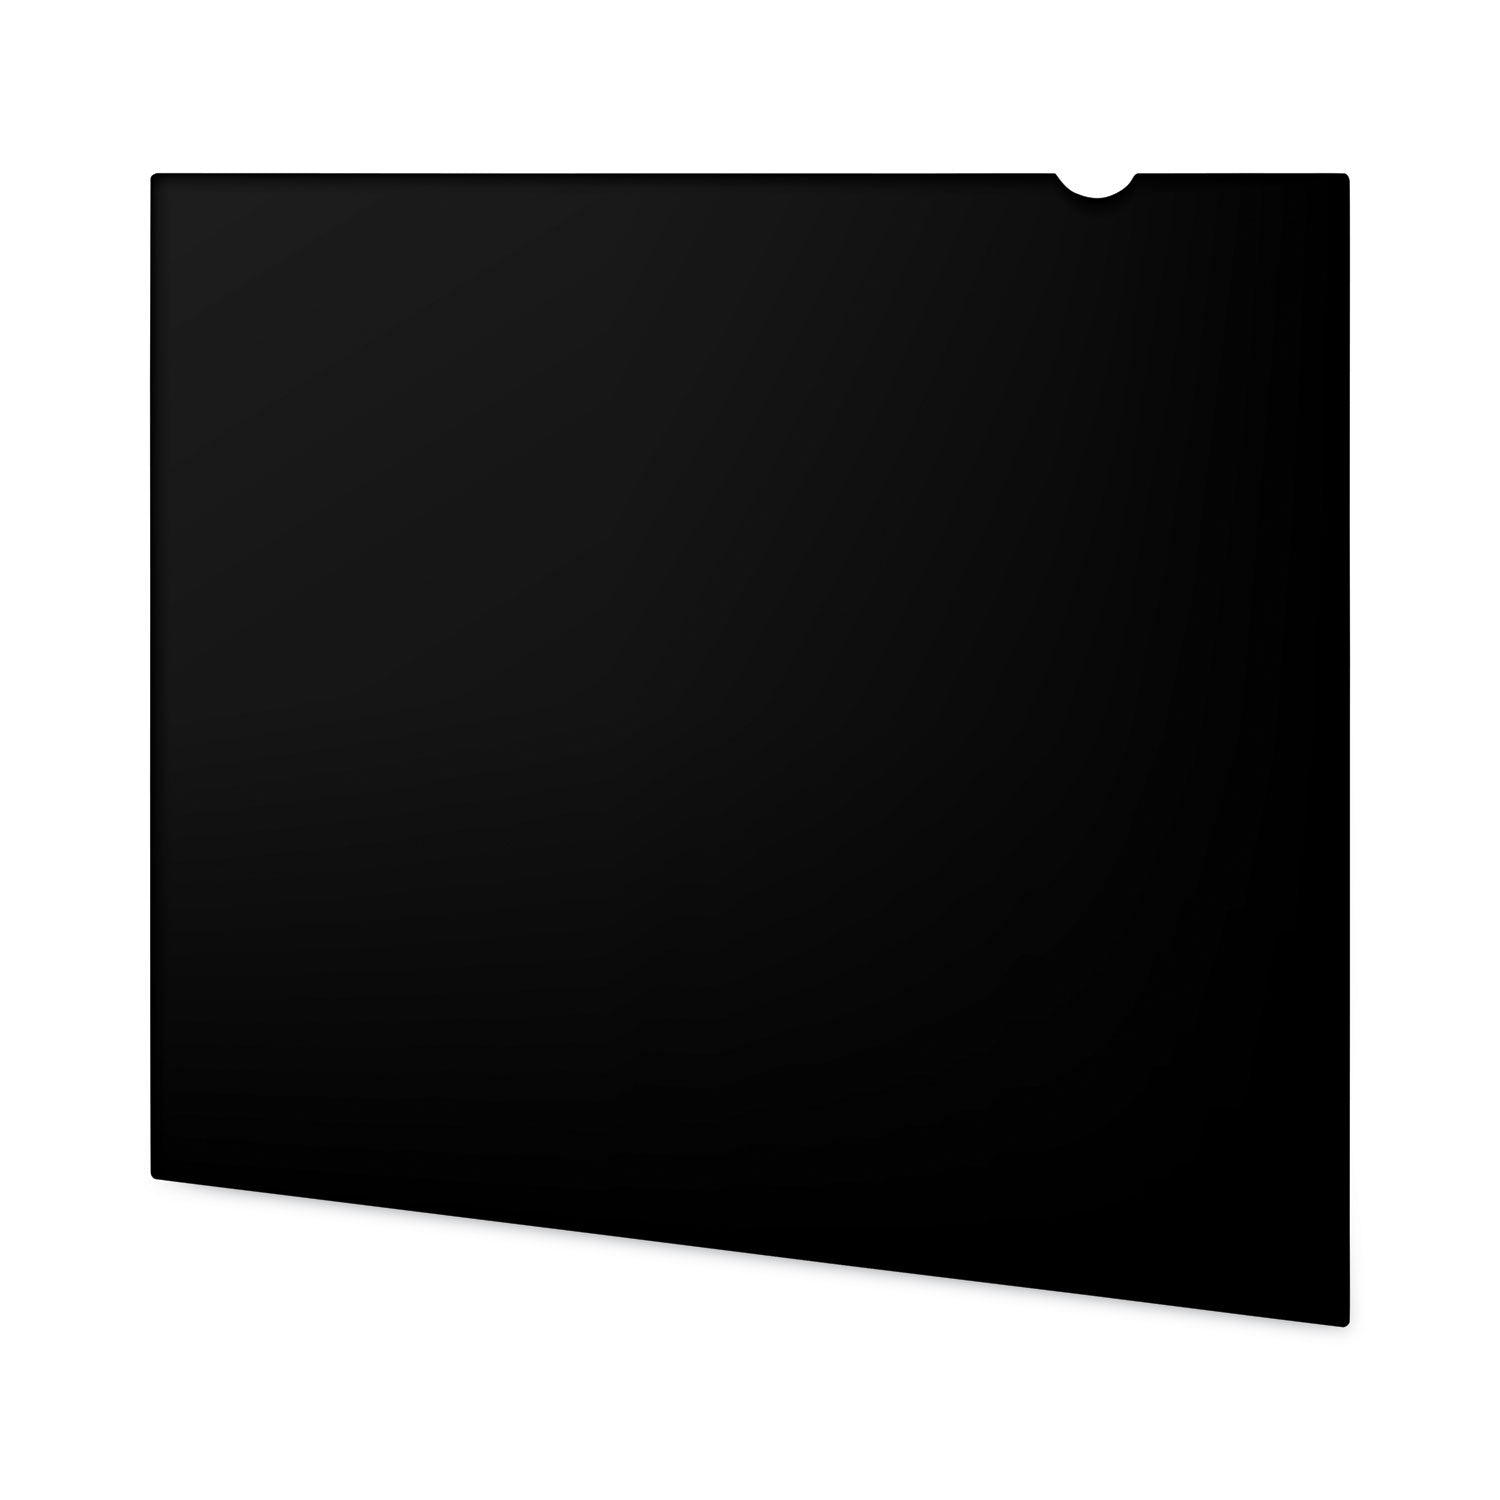 Blackout Privacy Filter for 18.5" Widescreen Flat Panel Monitor, 16:9 Aspect Ratio - 